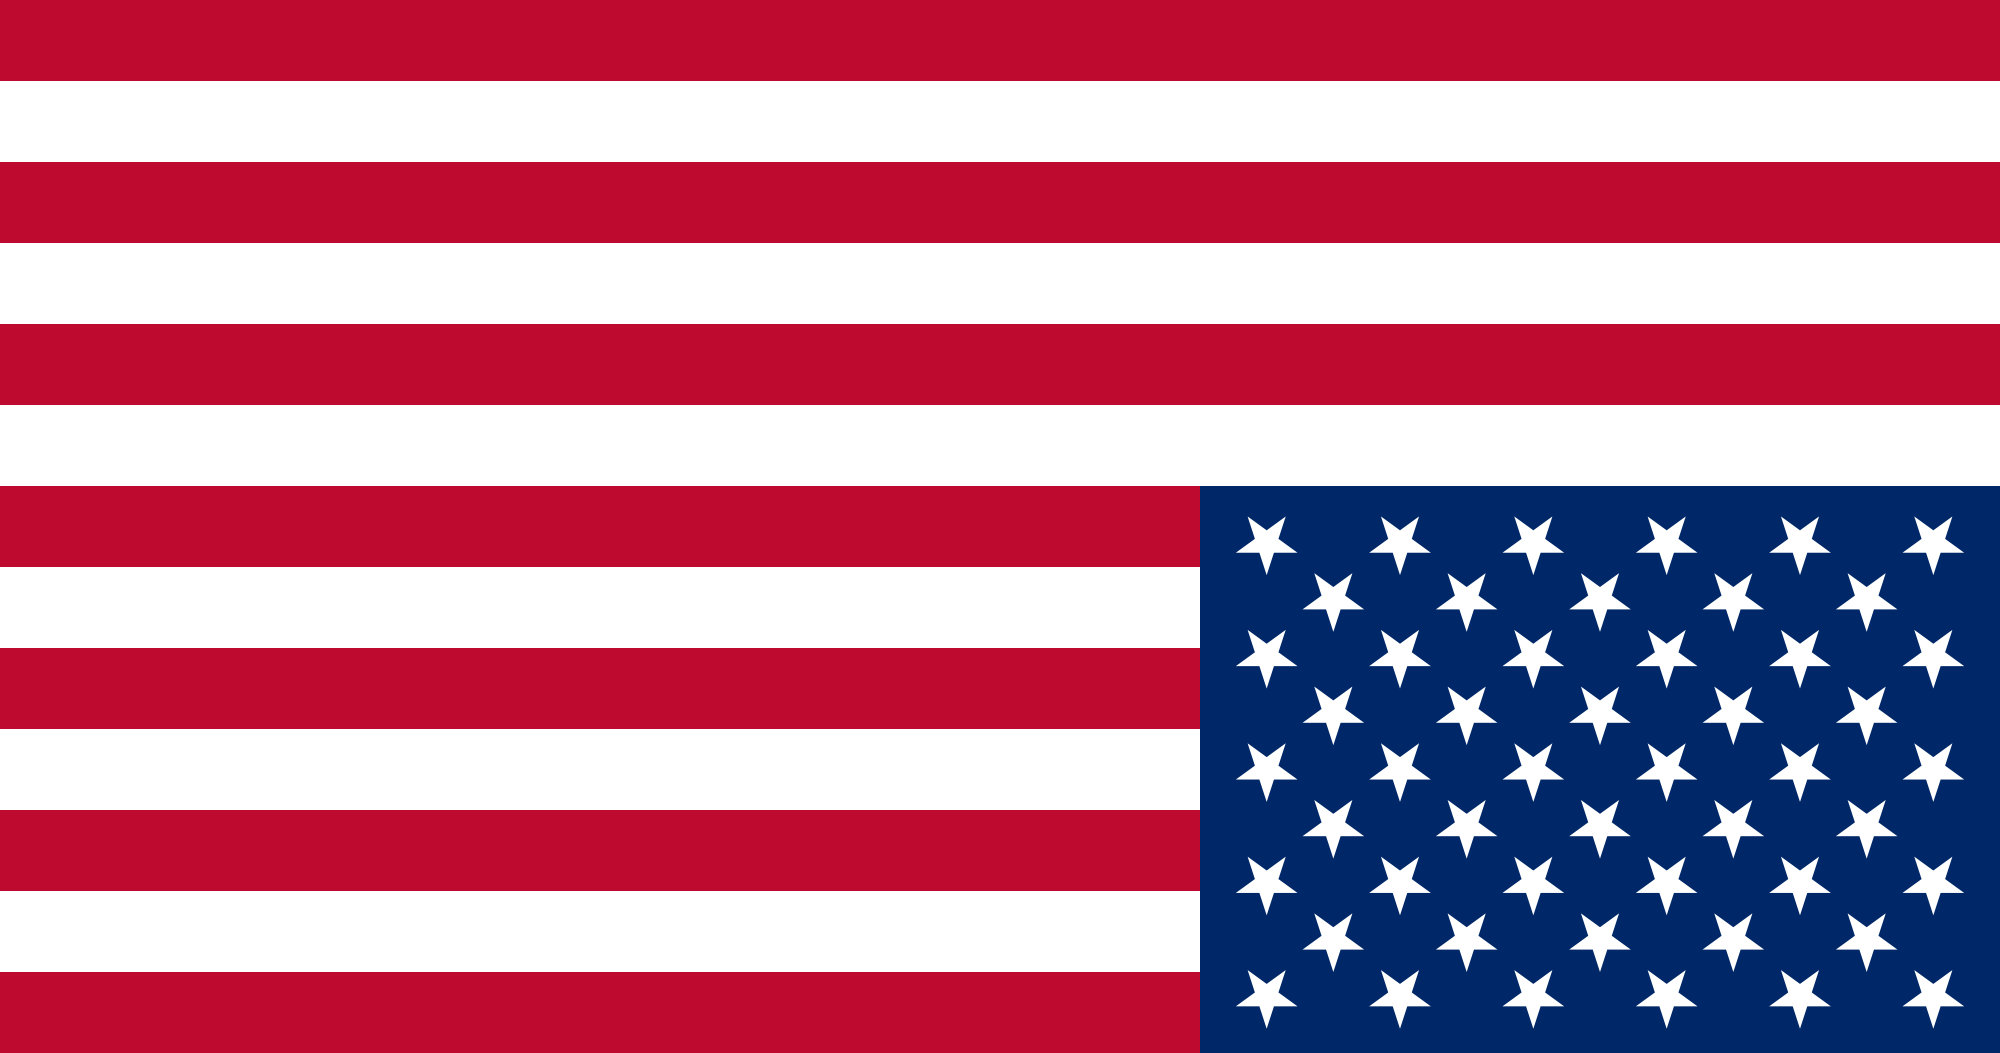 File:Flag of the United States (upside down).svg - Wikimedia Commons